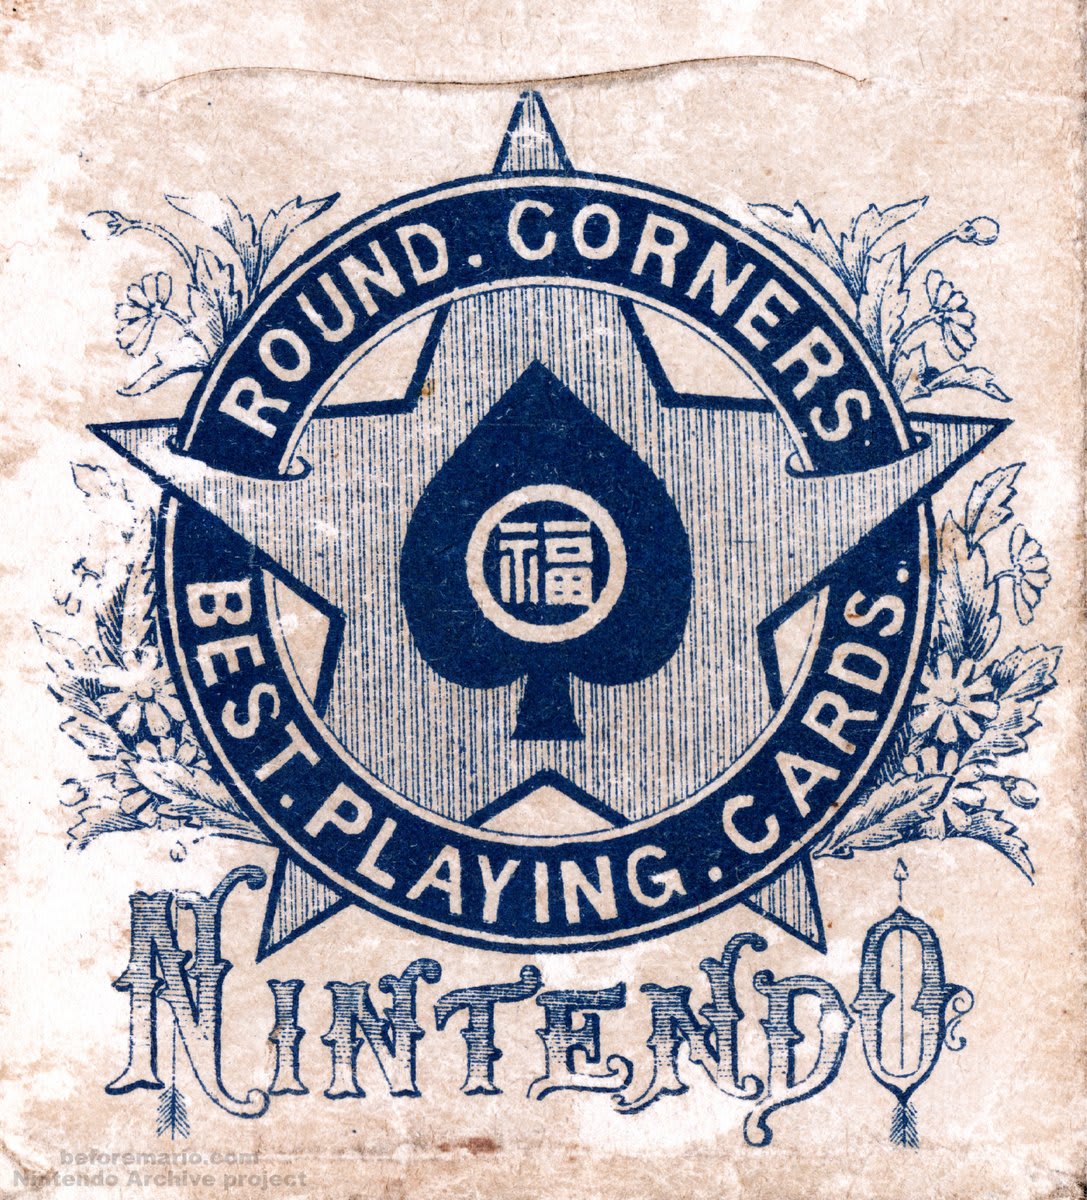 Nintendo's oldest playing cards? Marufuku No. 1 Here are some close-ups. More on the blog.